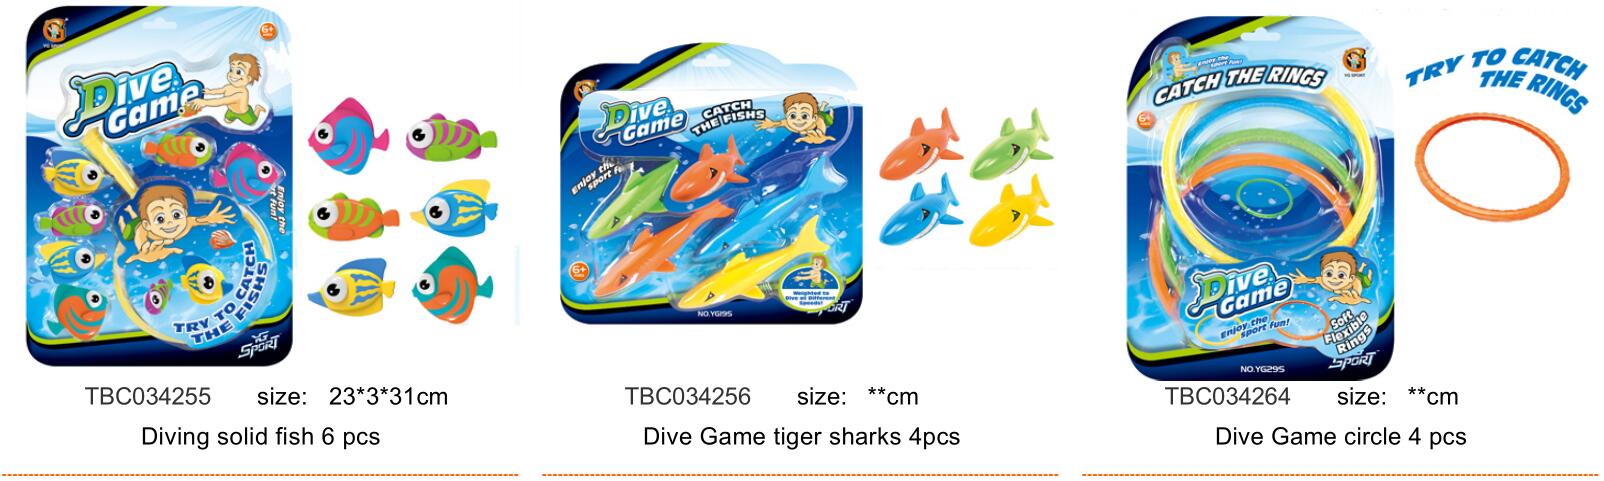 Diving fish toys